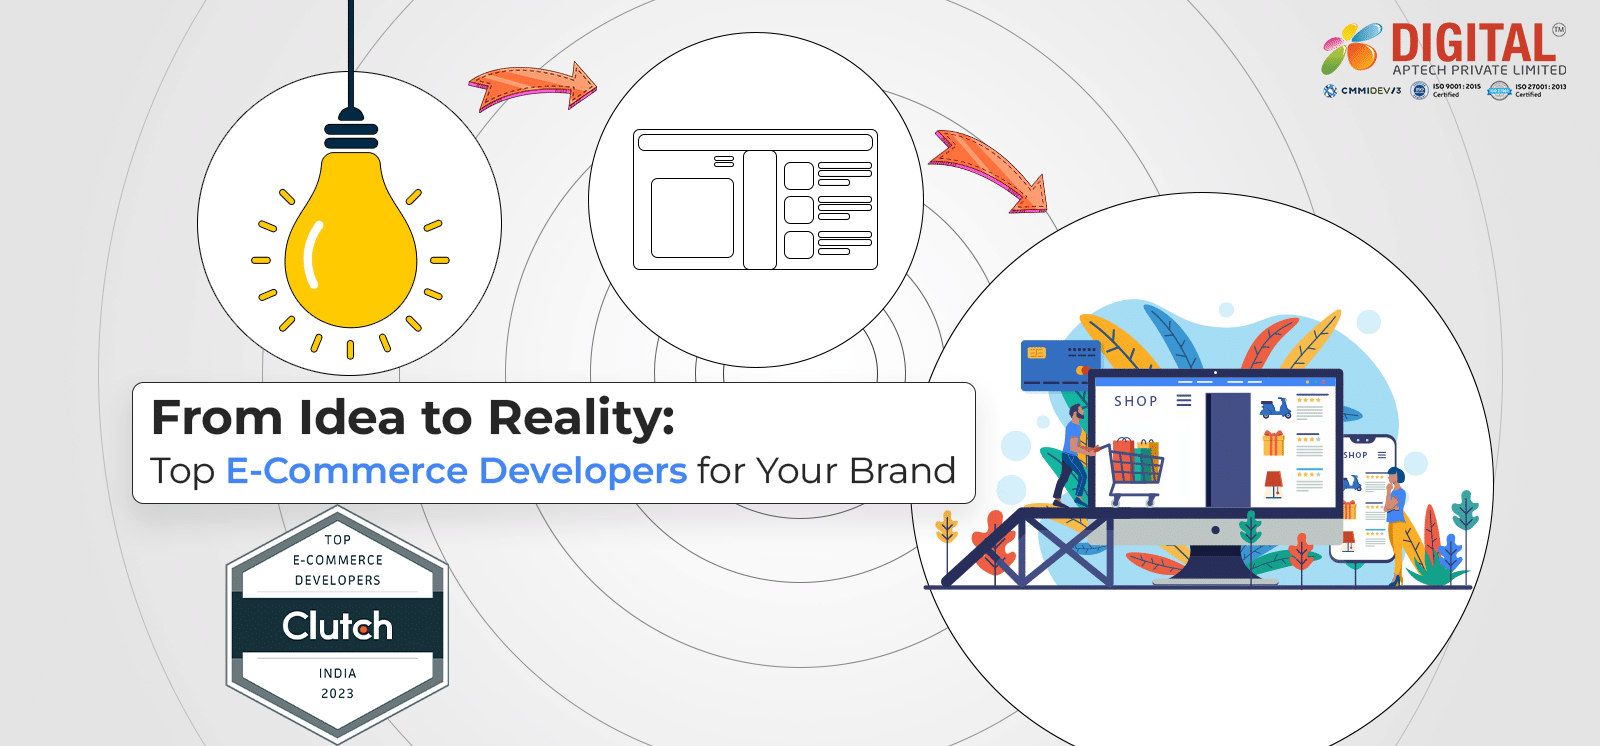 From Idea to Reality: Top E-Commerce Developers for Your Brand